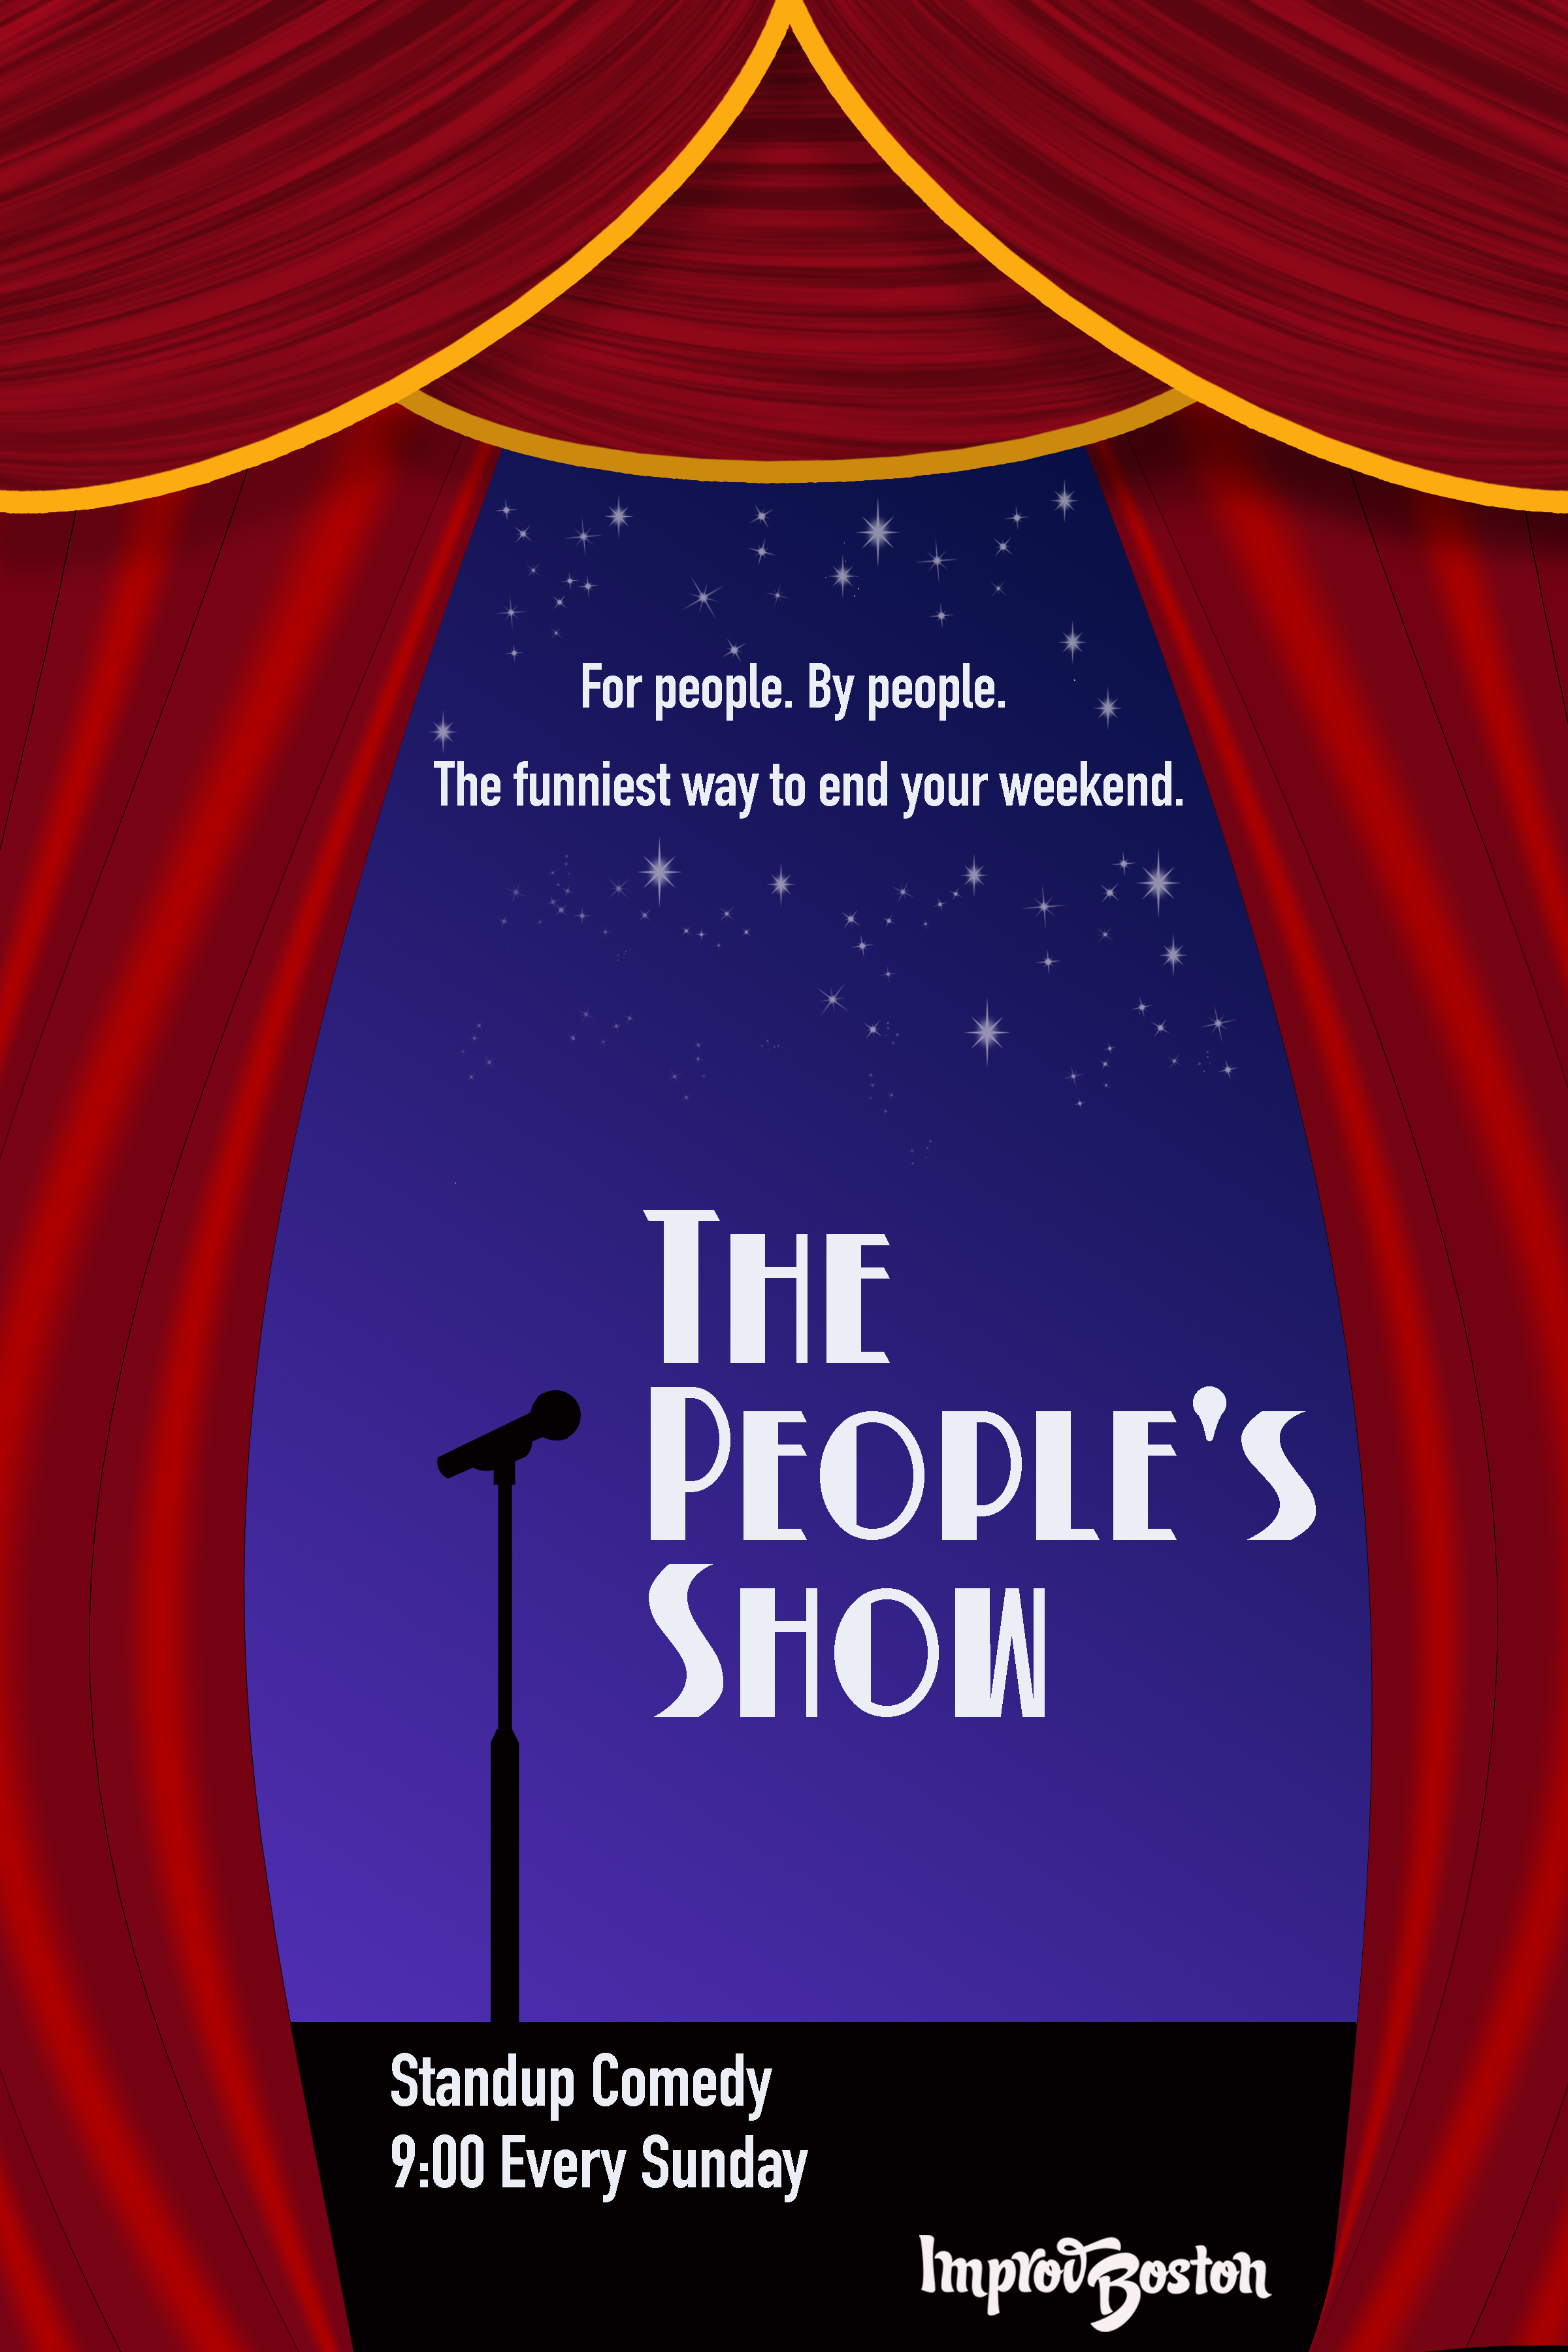 The People's Show: Standup Comedy at ImprovBoston!